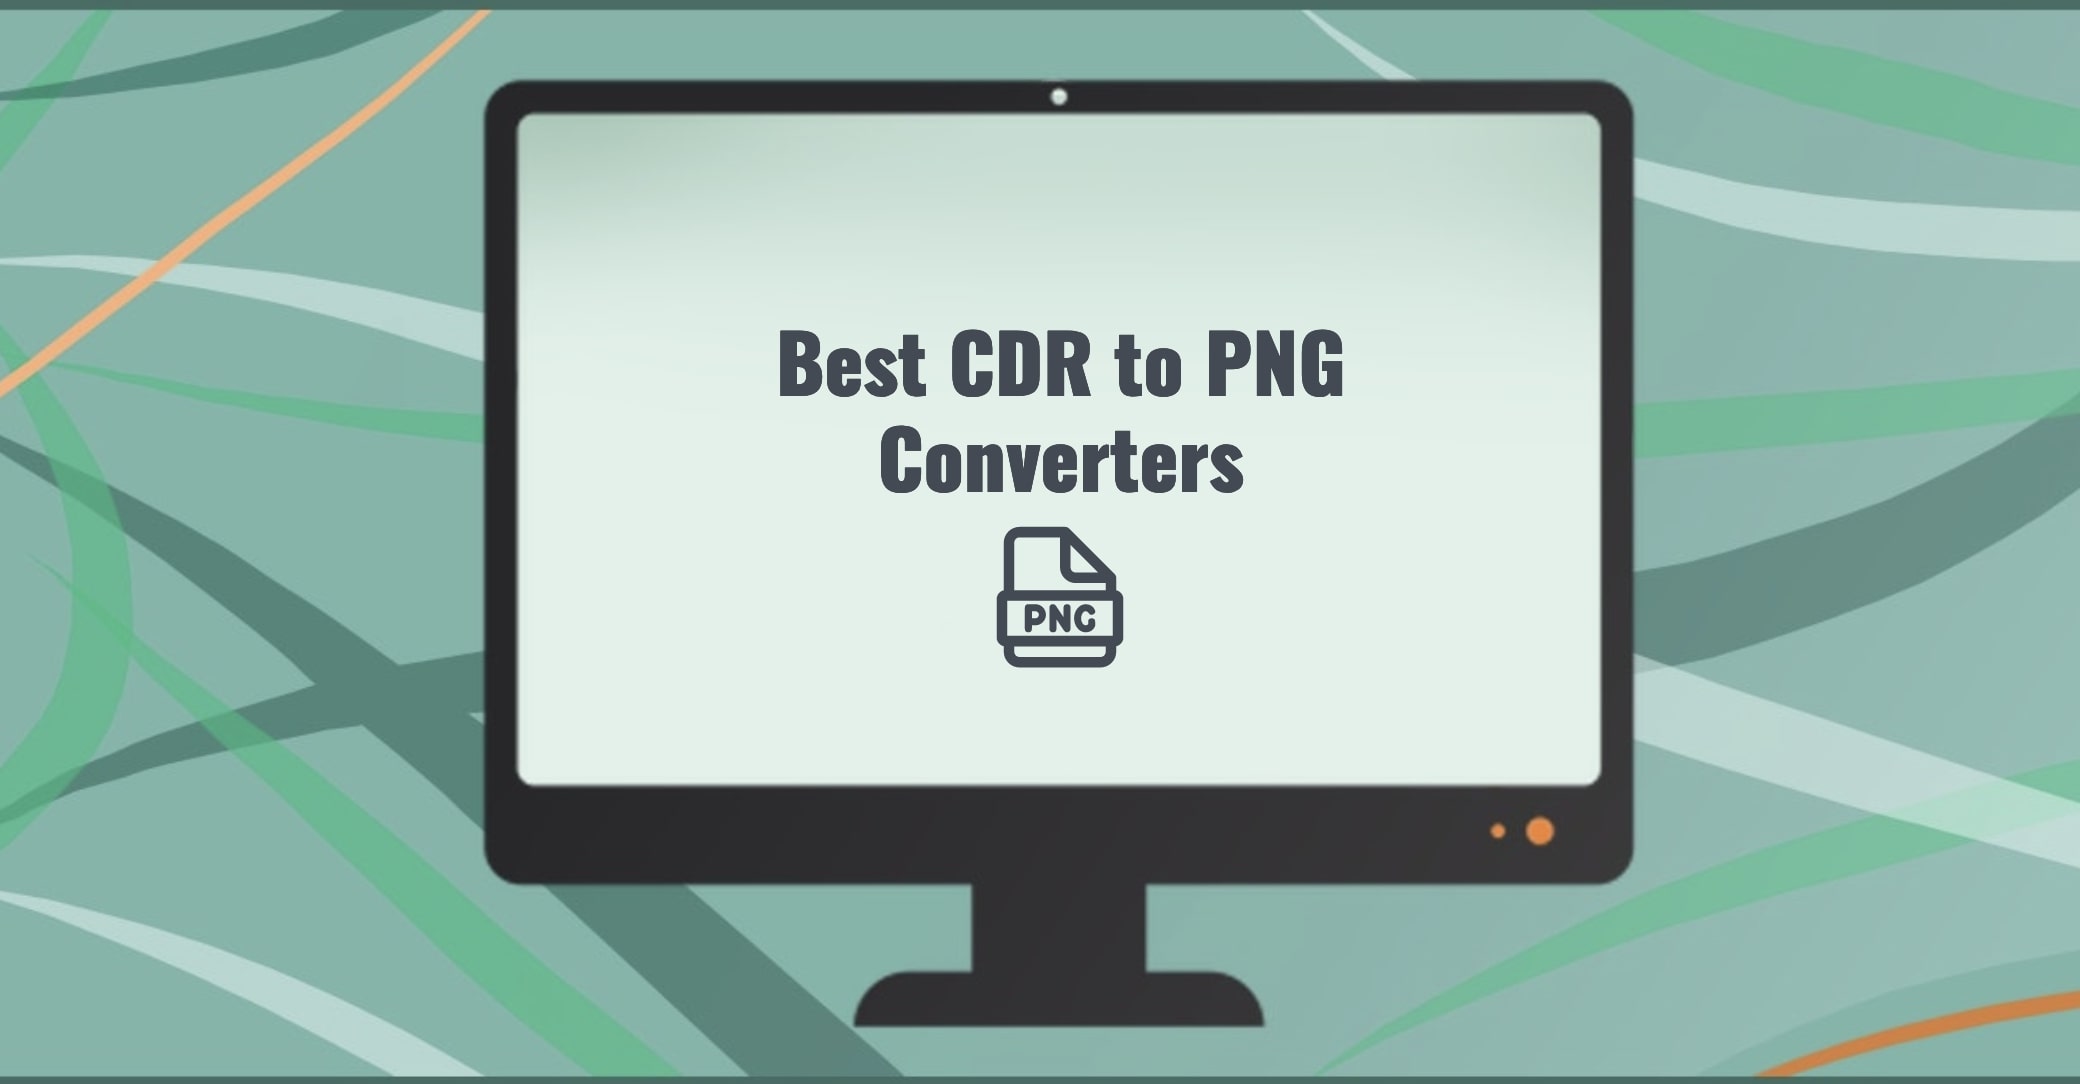 Best CDR to PNG Converters